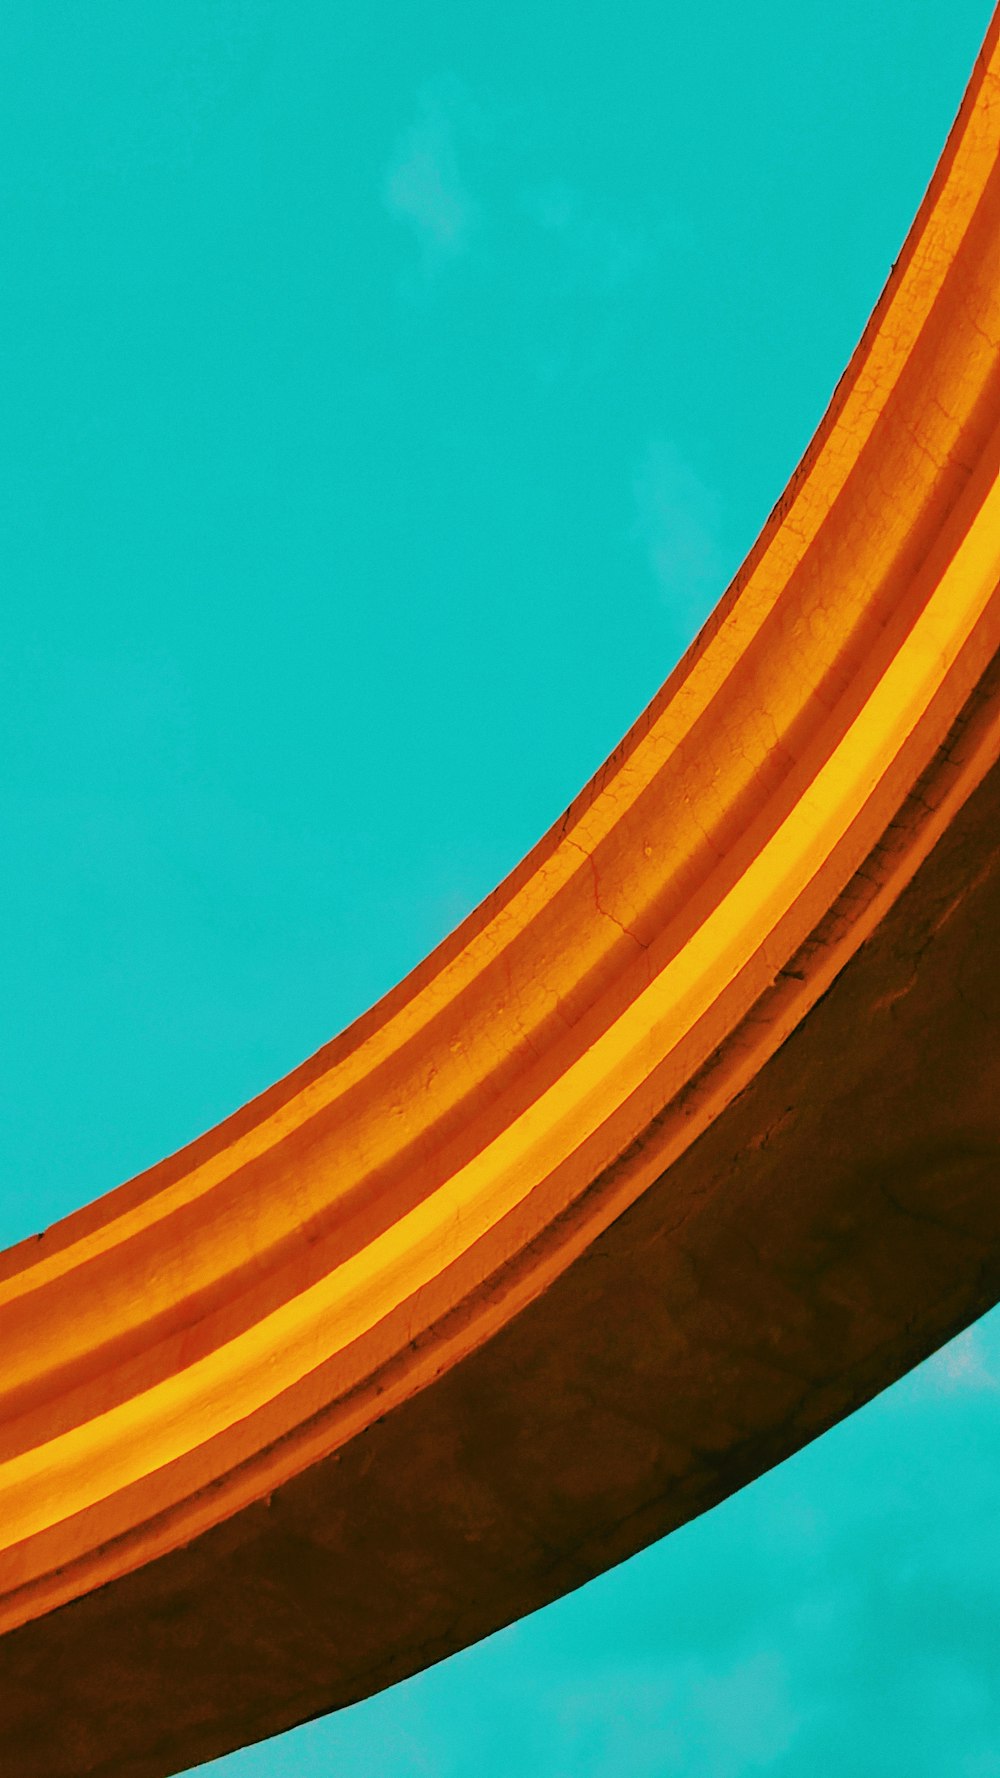 a close up of a curved metal object against a blue sky